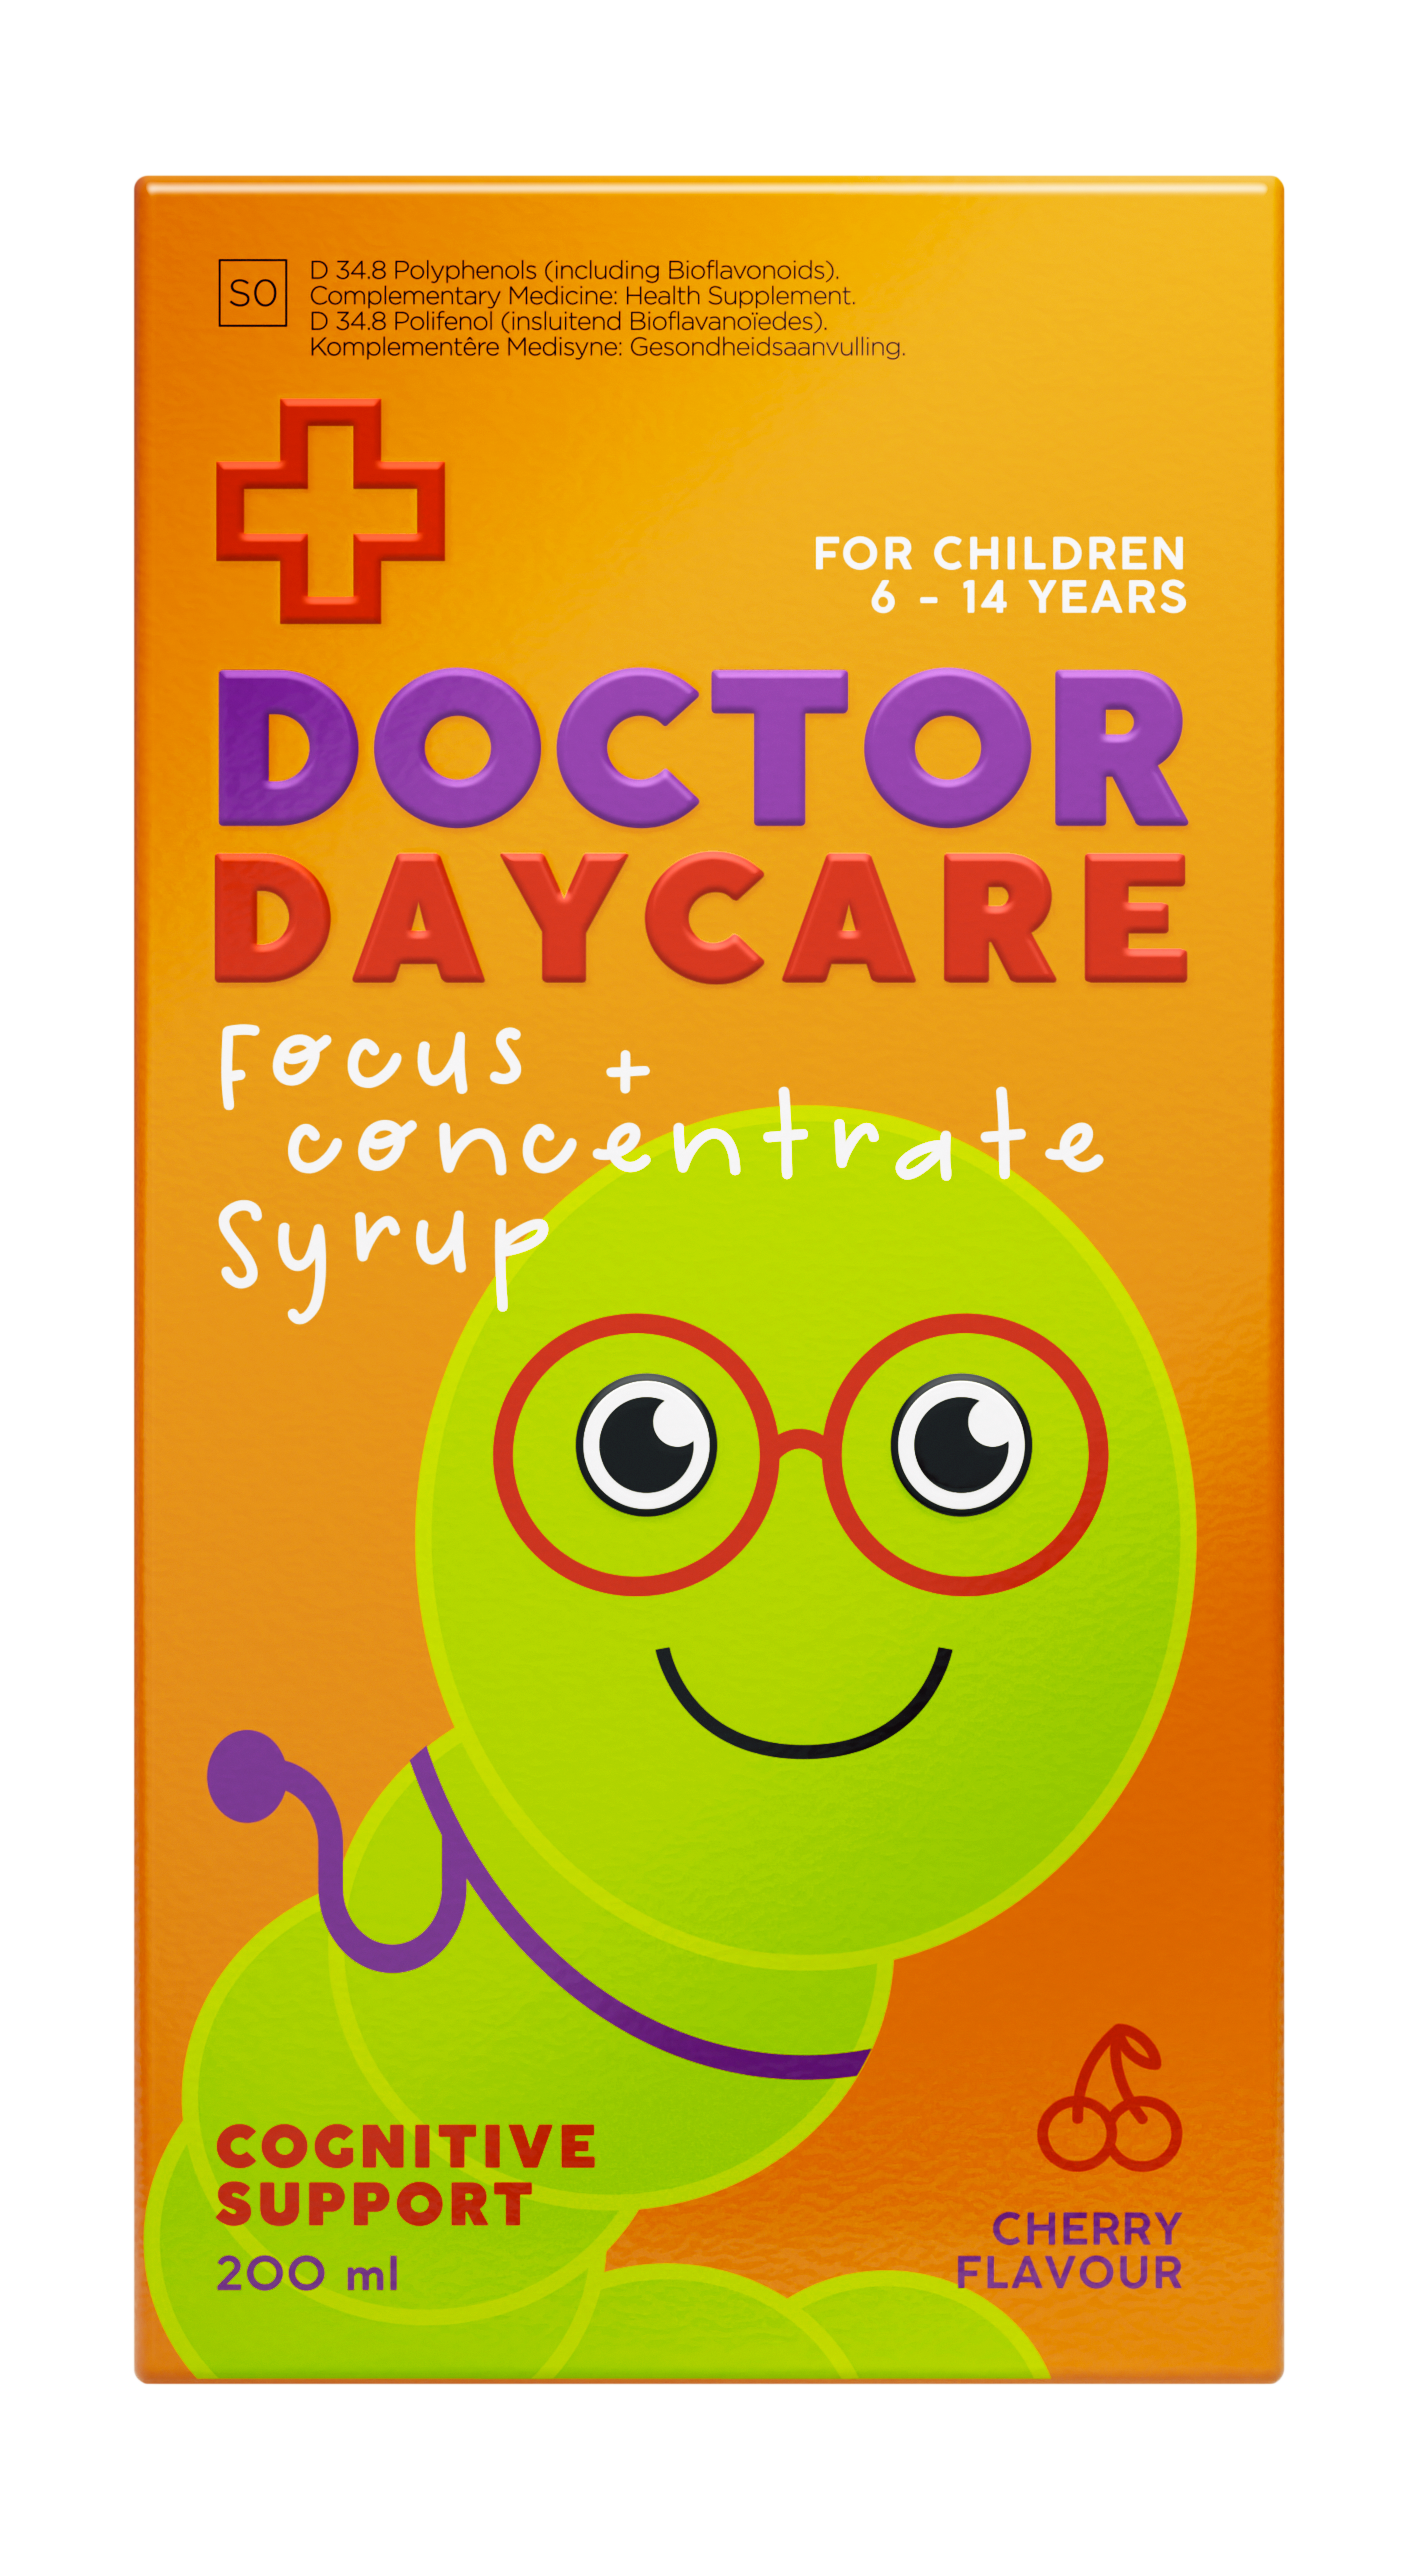 Dr Daycare Focus box.png